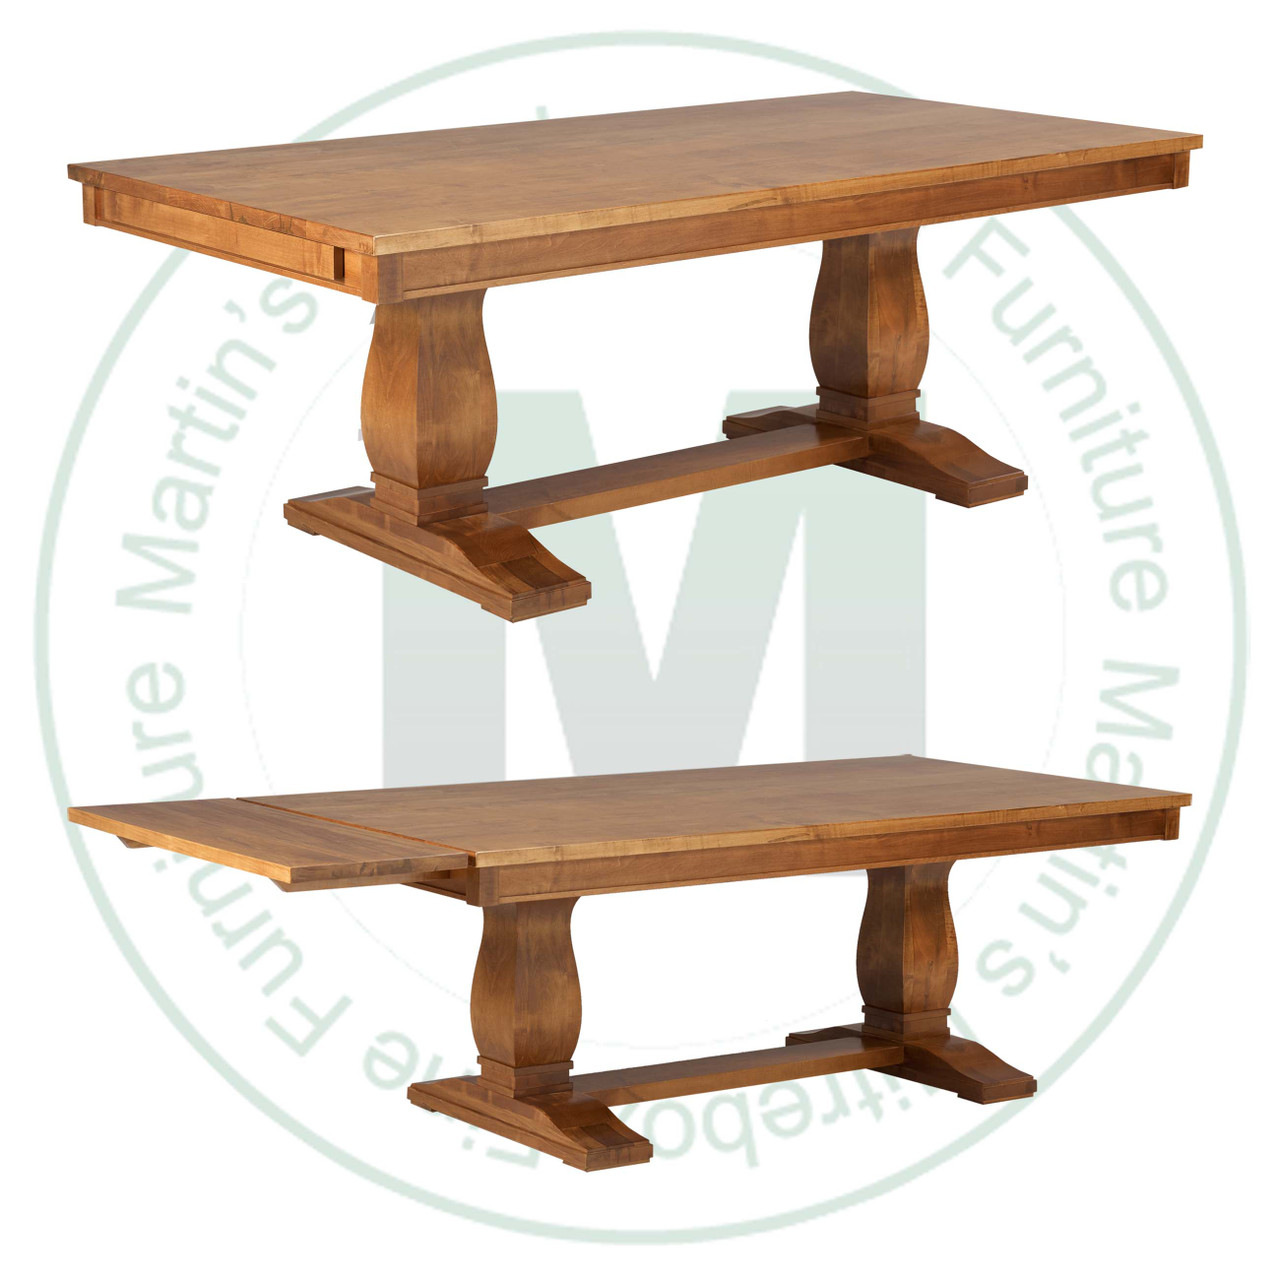 Maple Madrid Solid Top Double Pedestal Table 48''D x 96''W x 30''H With 2 - 16'' Leaves On End Table Has 1.25'' Thick Top